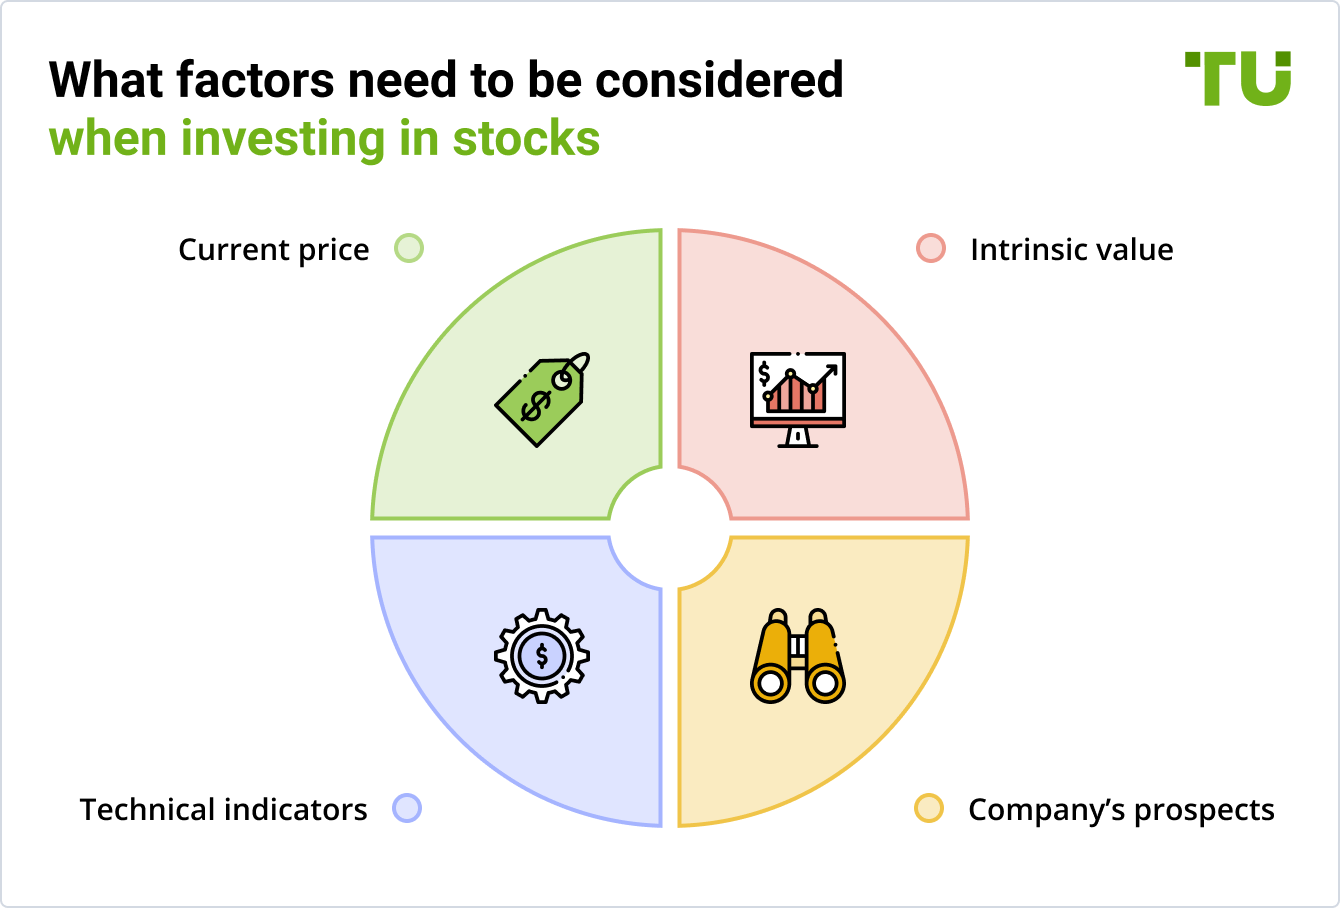 What factors need to be considered when investing in stocks